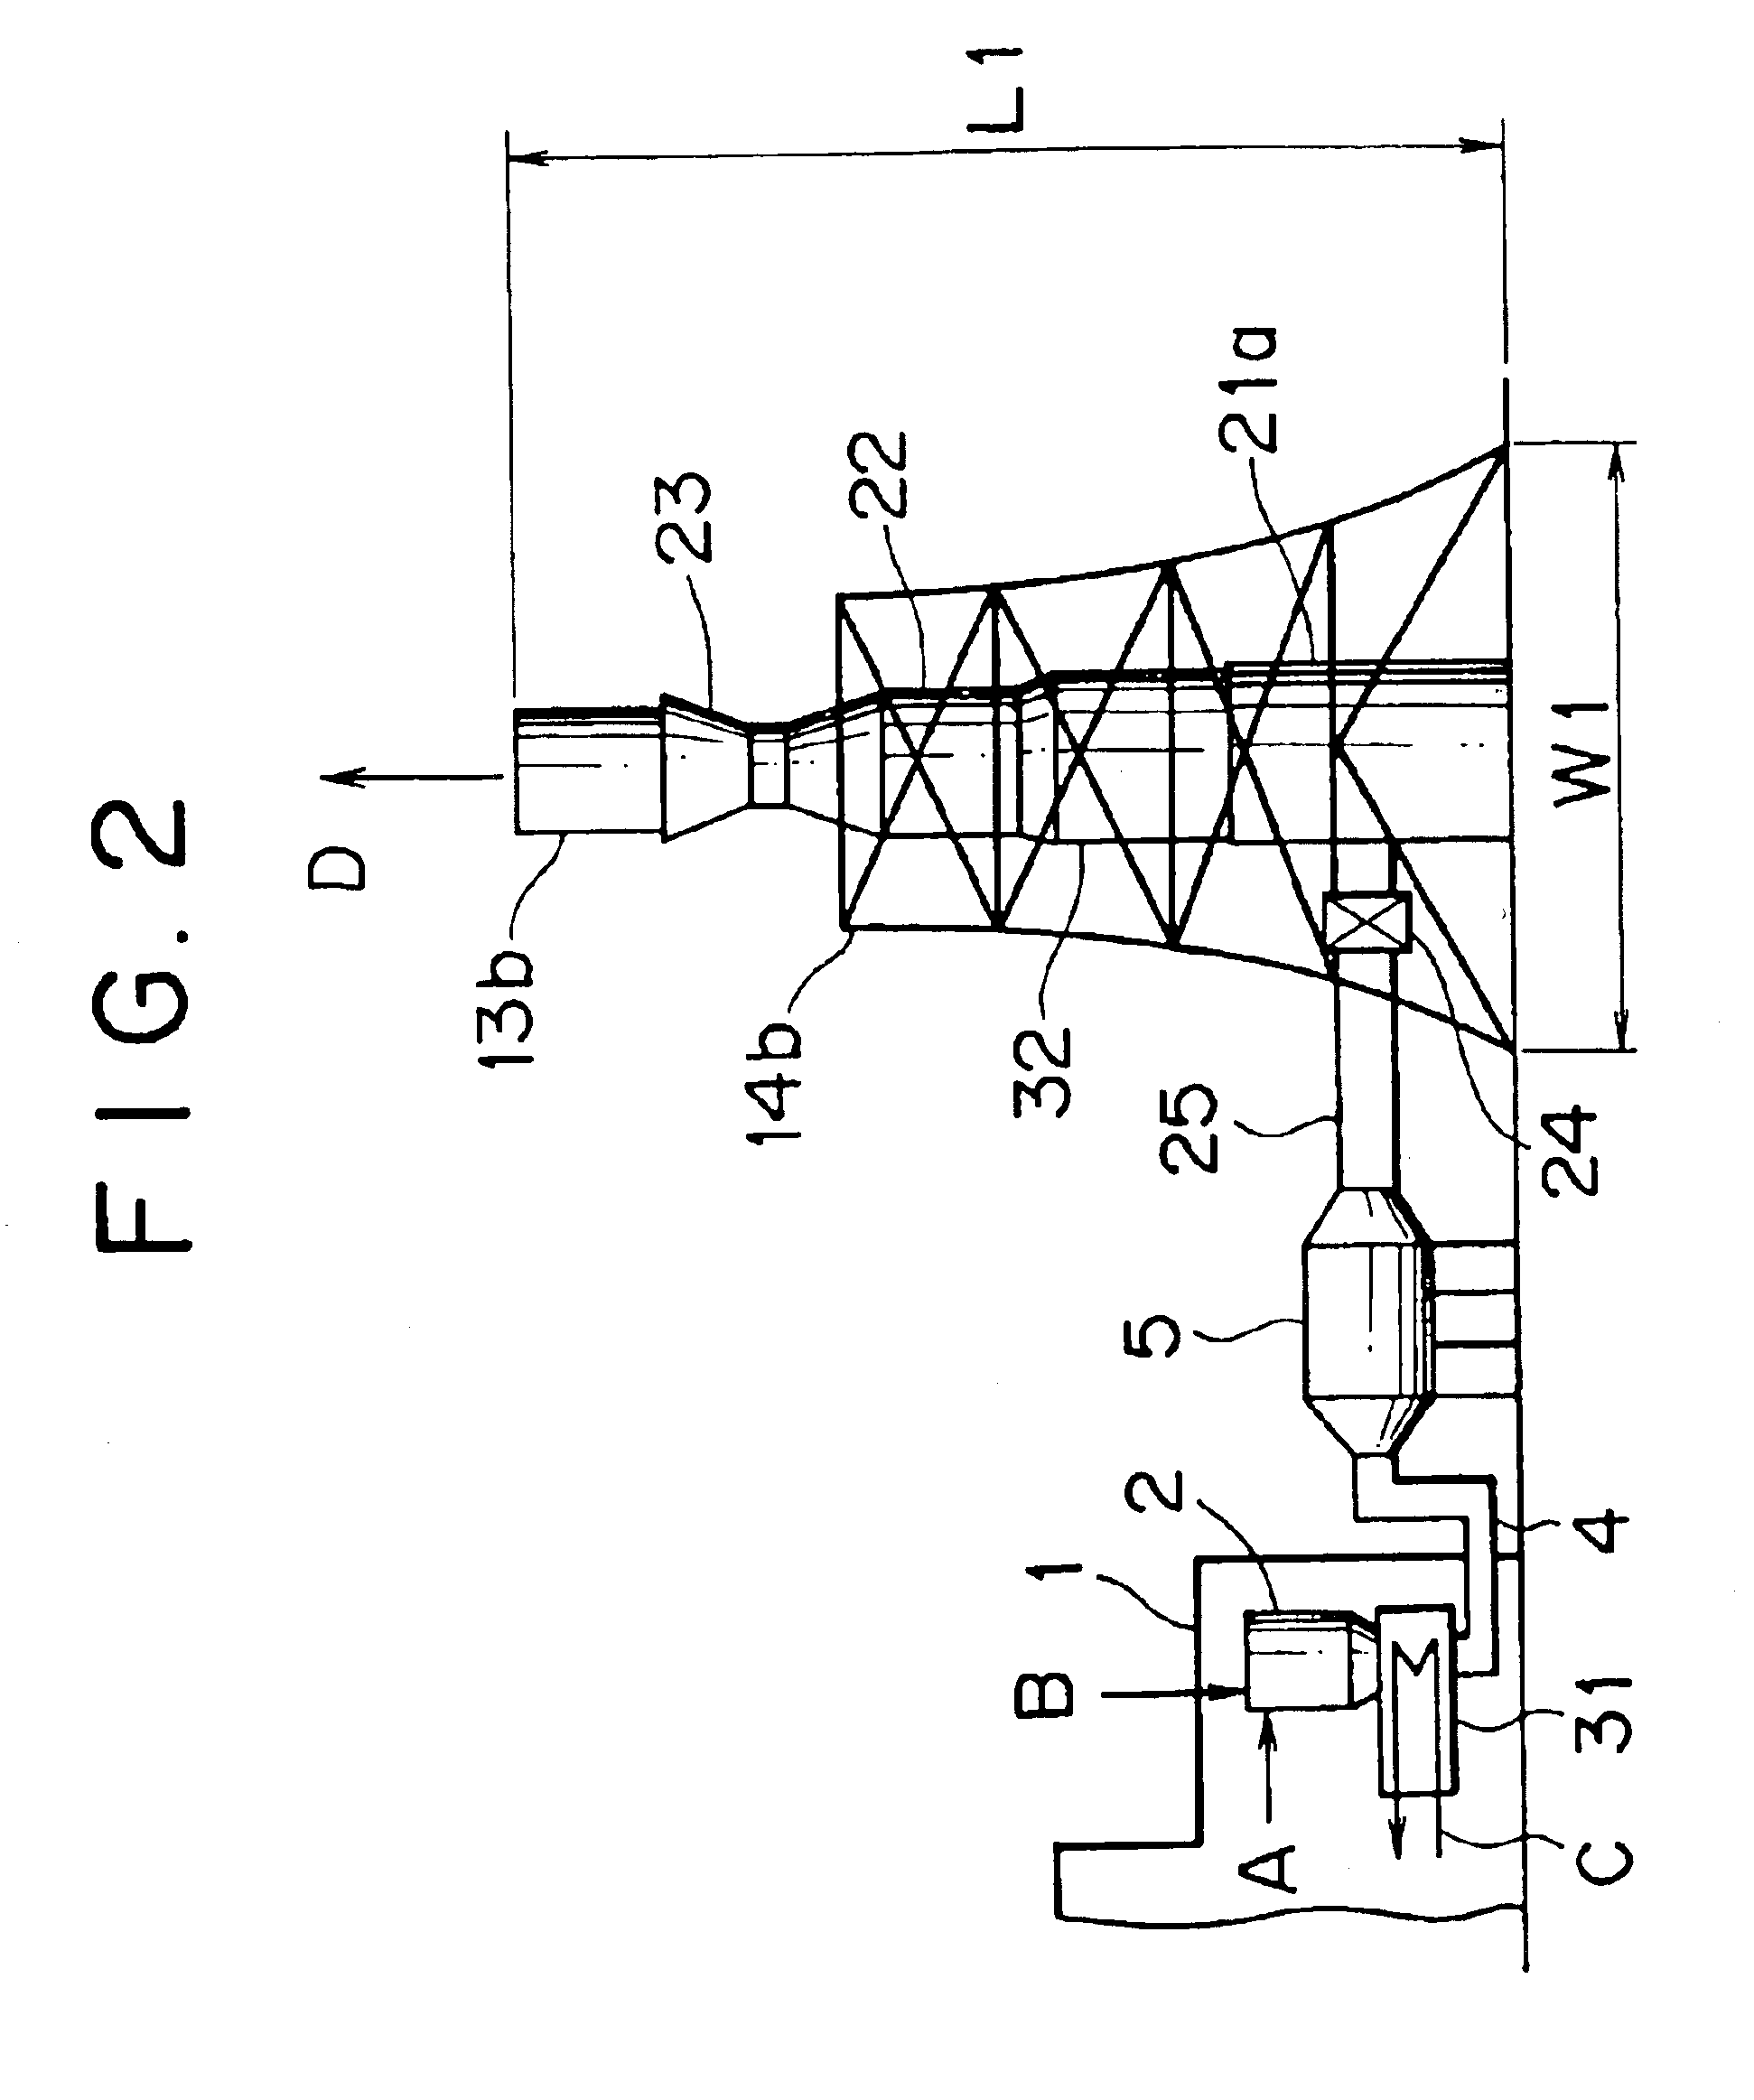 Flue gas treating system and process